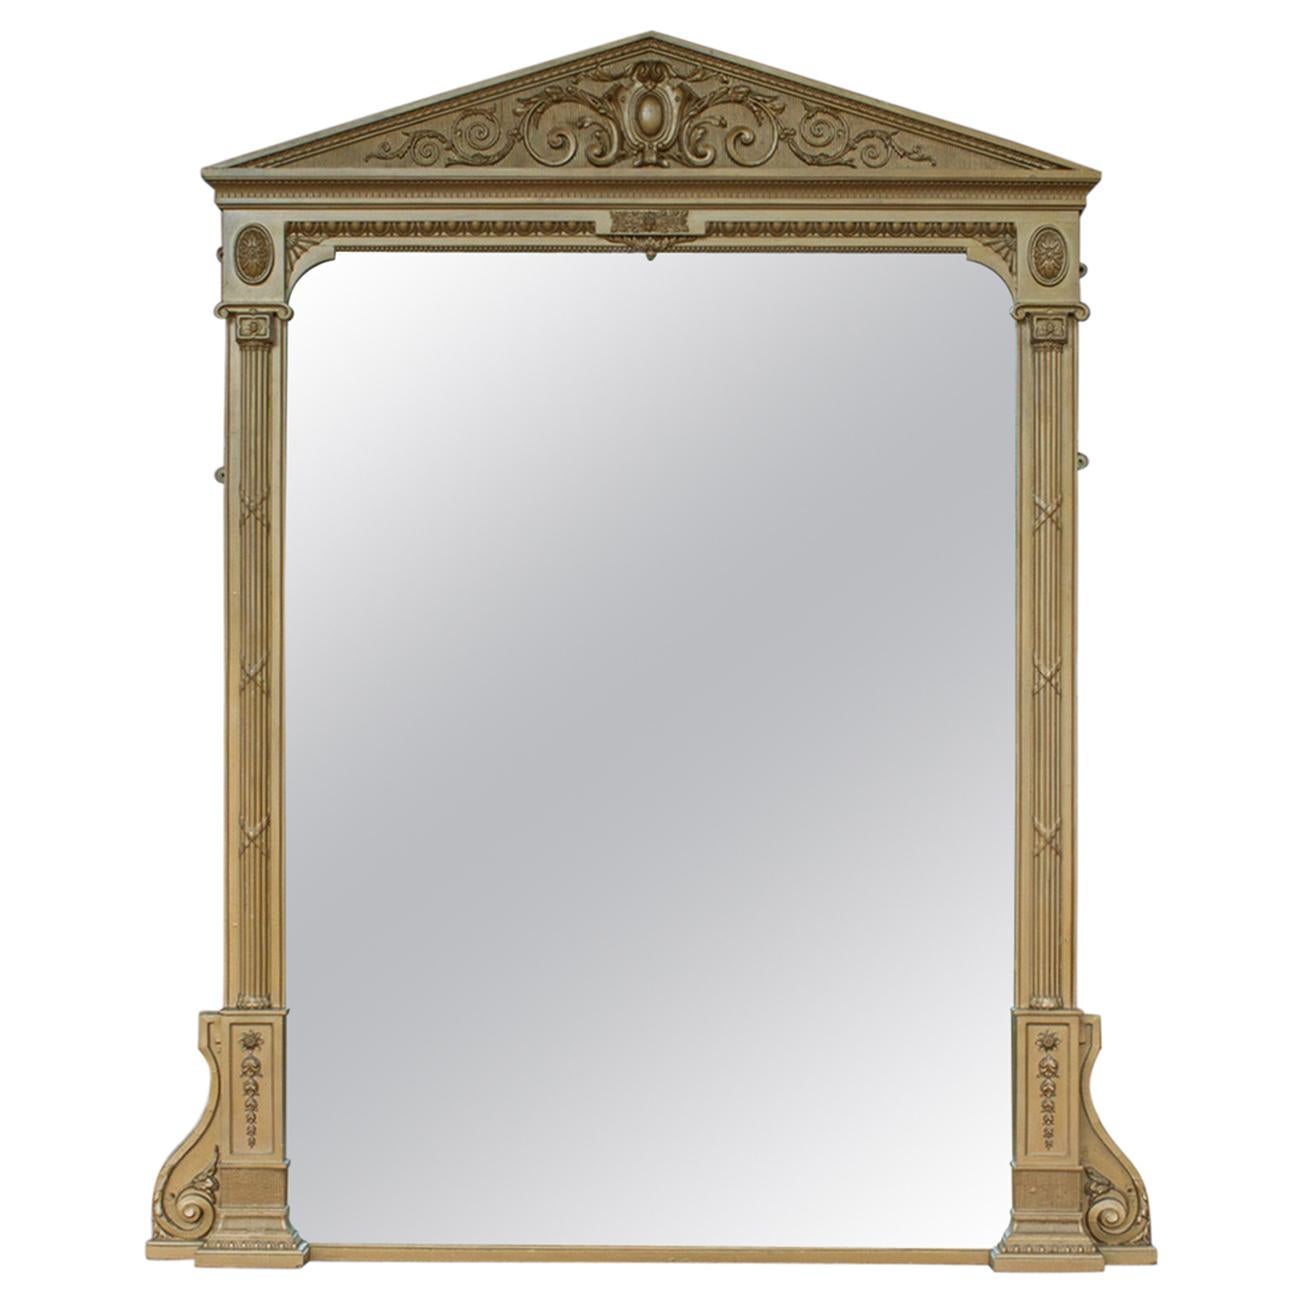 Very Large Antique Overmantel Mirror, Classical, circa 1850